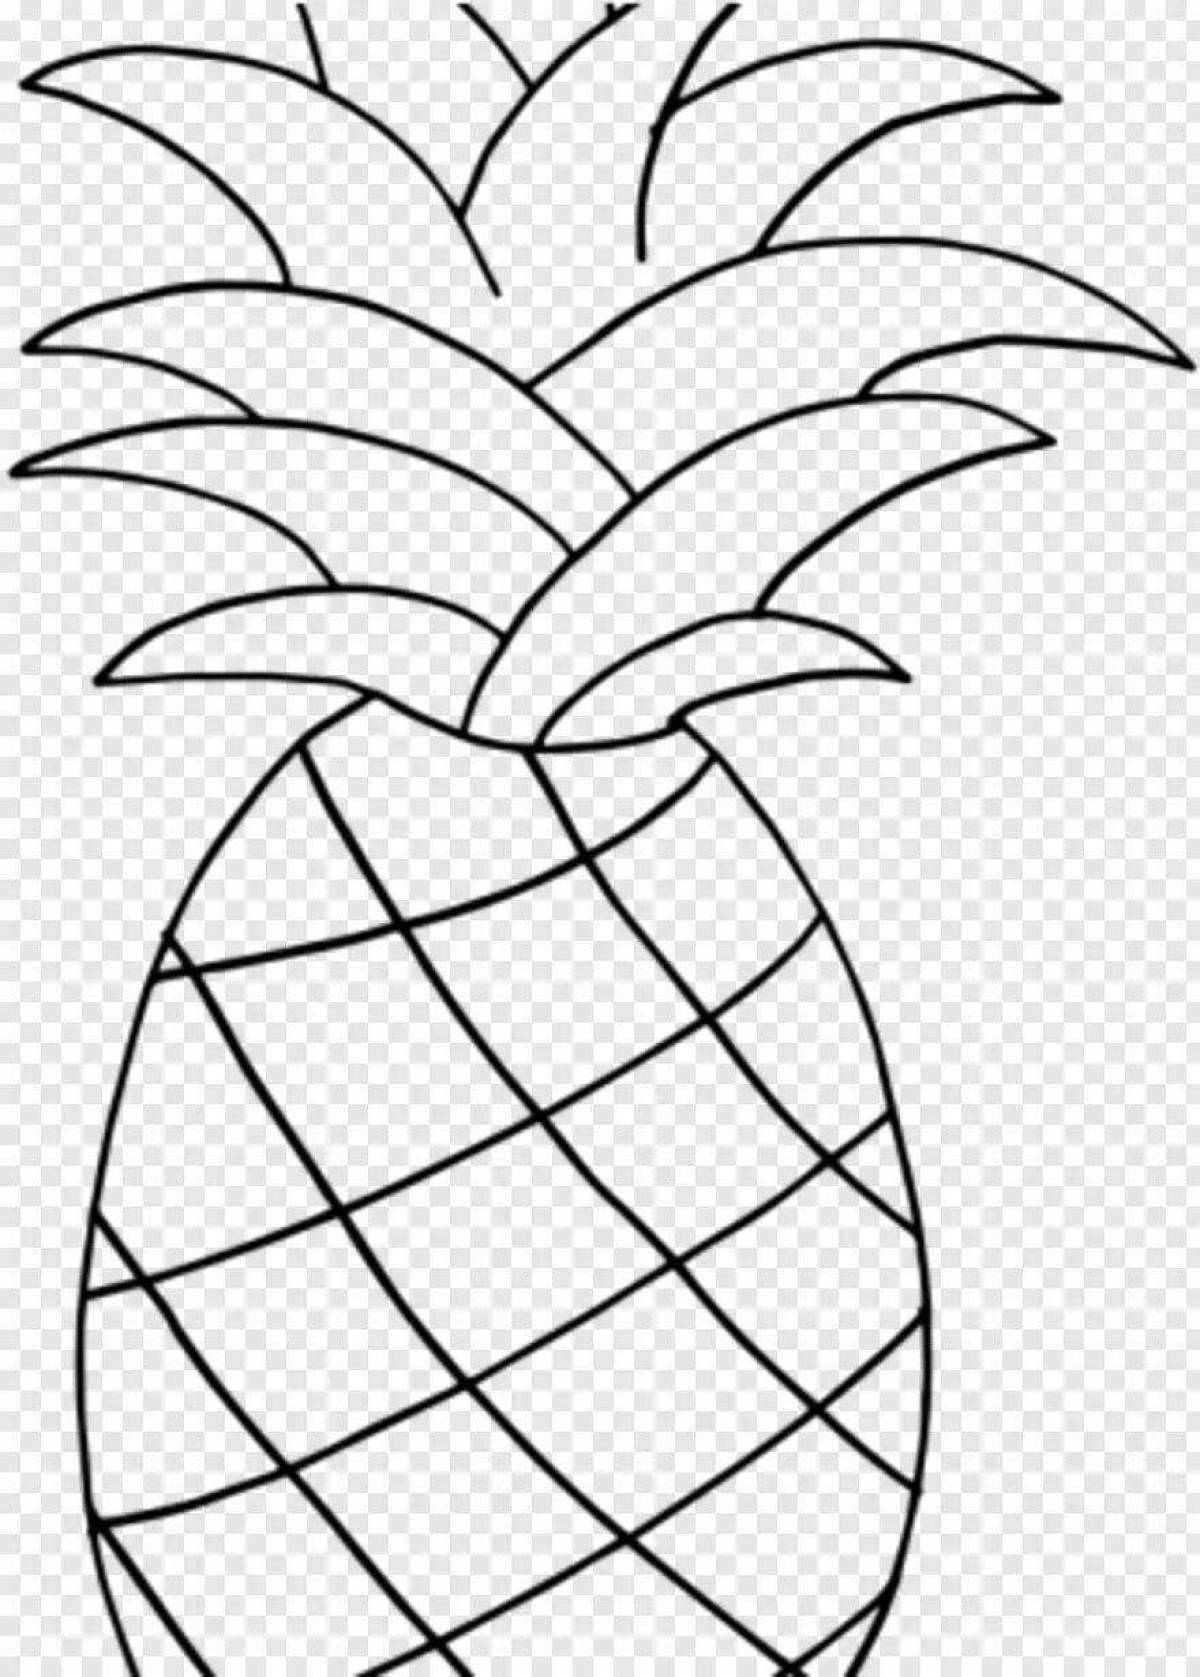 Coloring pineapple for kids